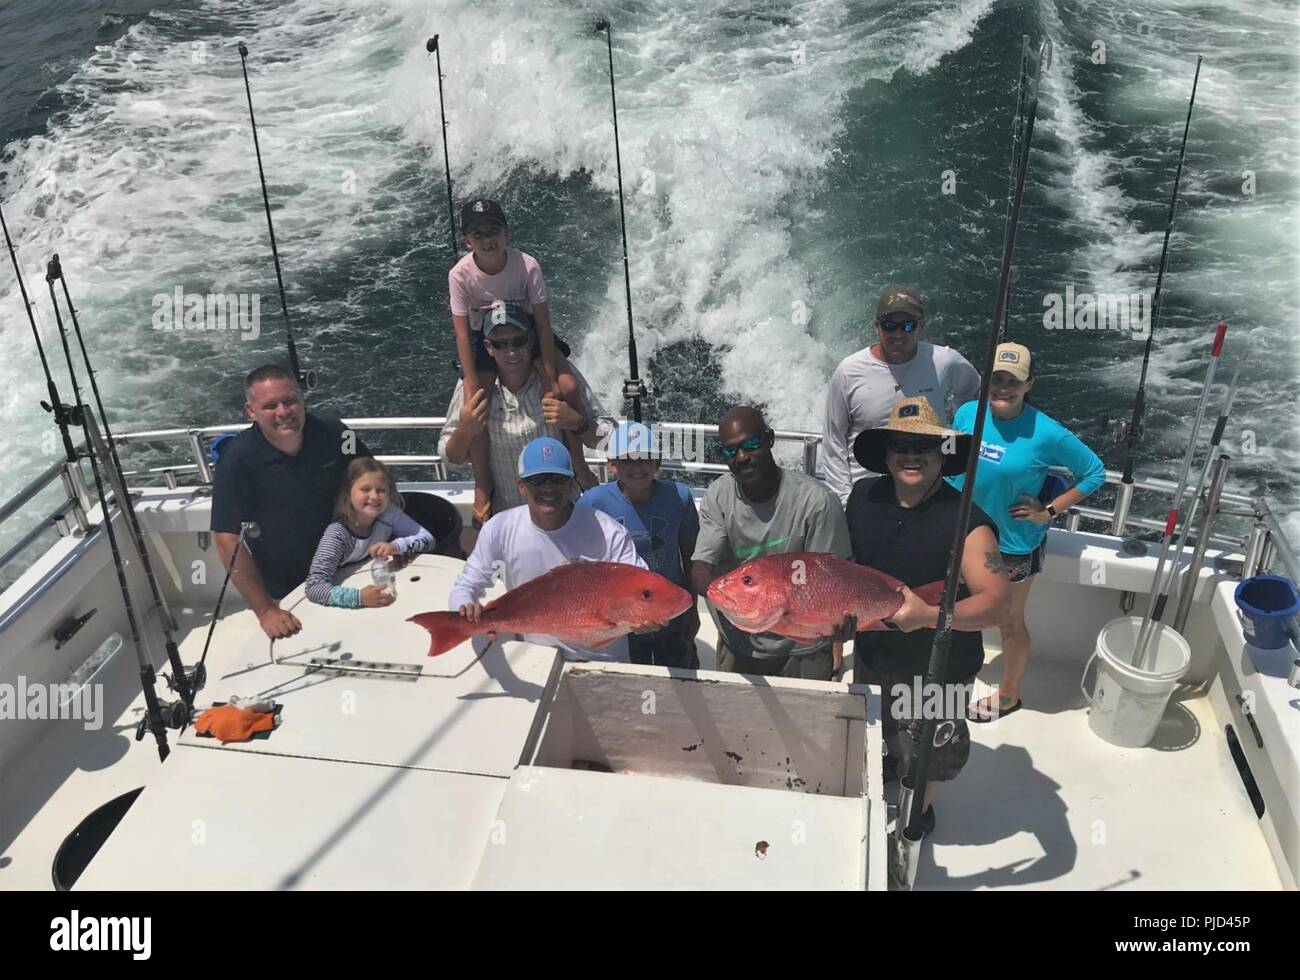 BEACH, Ala. (July 18, 2018)  Members of the Center for Information Warfare Training’s (CIWT) chief’s mess and wardroom participate in a deep sea fishing teambuilding event on the sea in the waters of the Gulf of Mexico. CIWT delivers trained information warfare professionals to the Navy and joint services, enabling optimal performance of information warfare across the full spectrum of military operations. Stock Photo